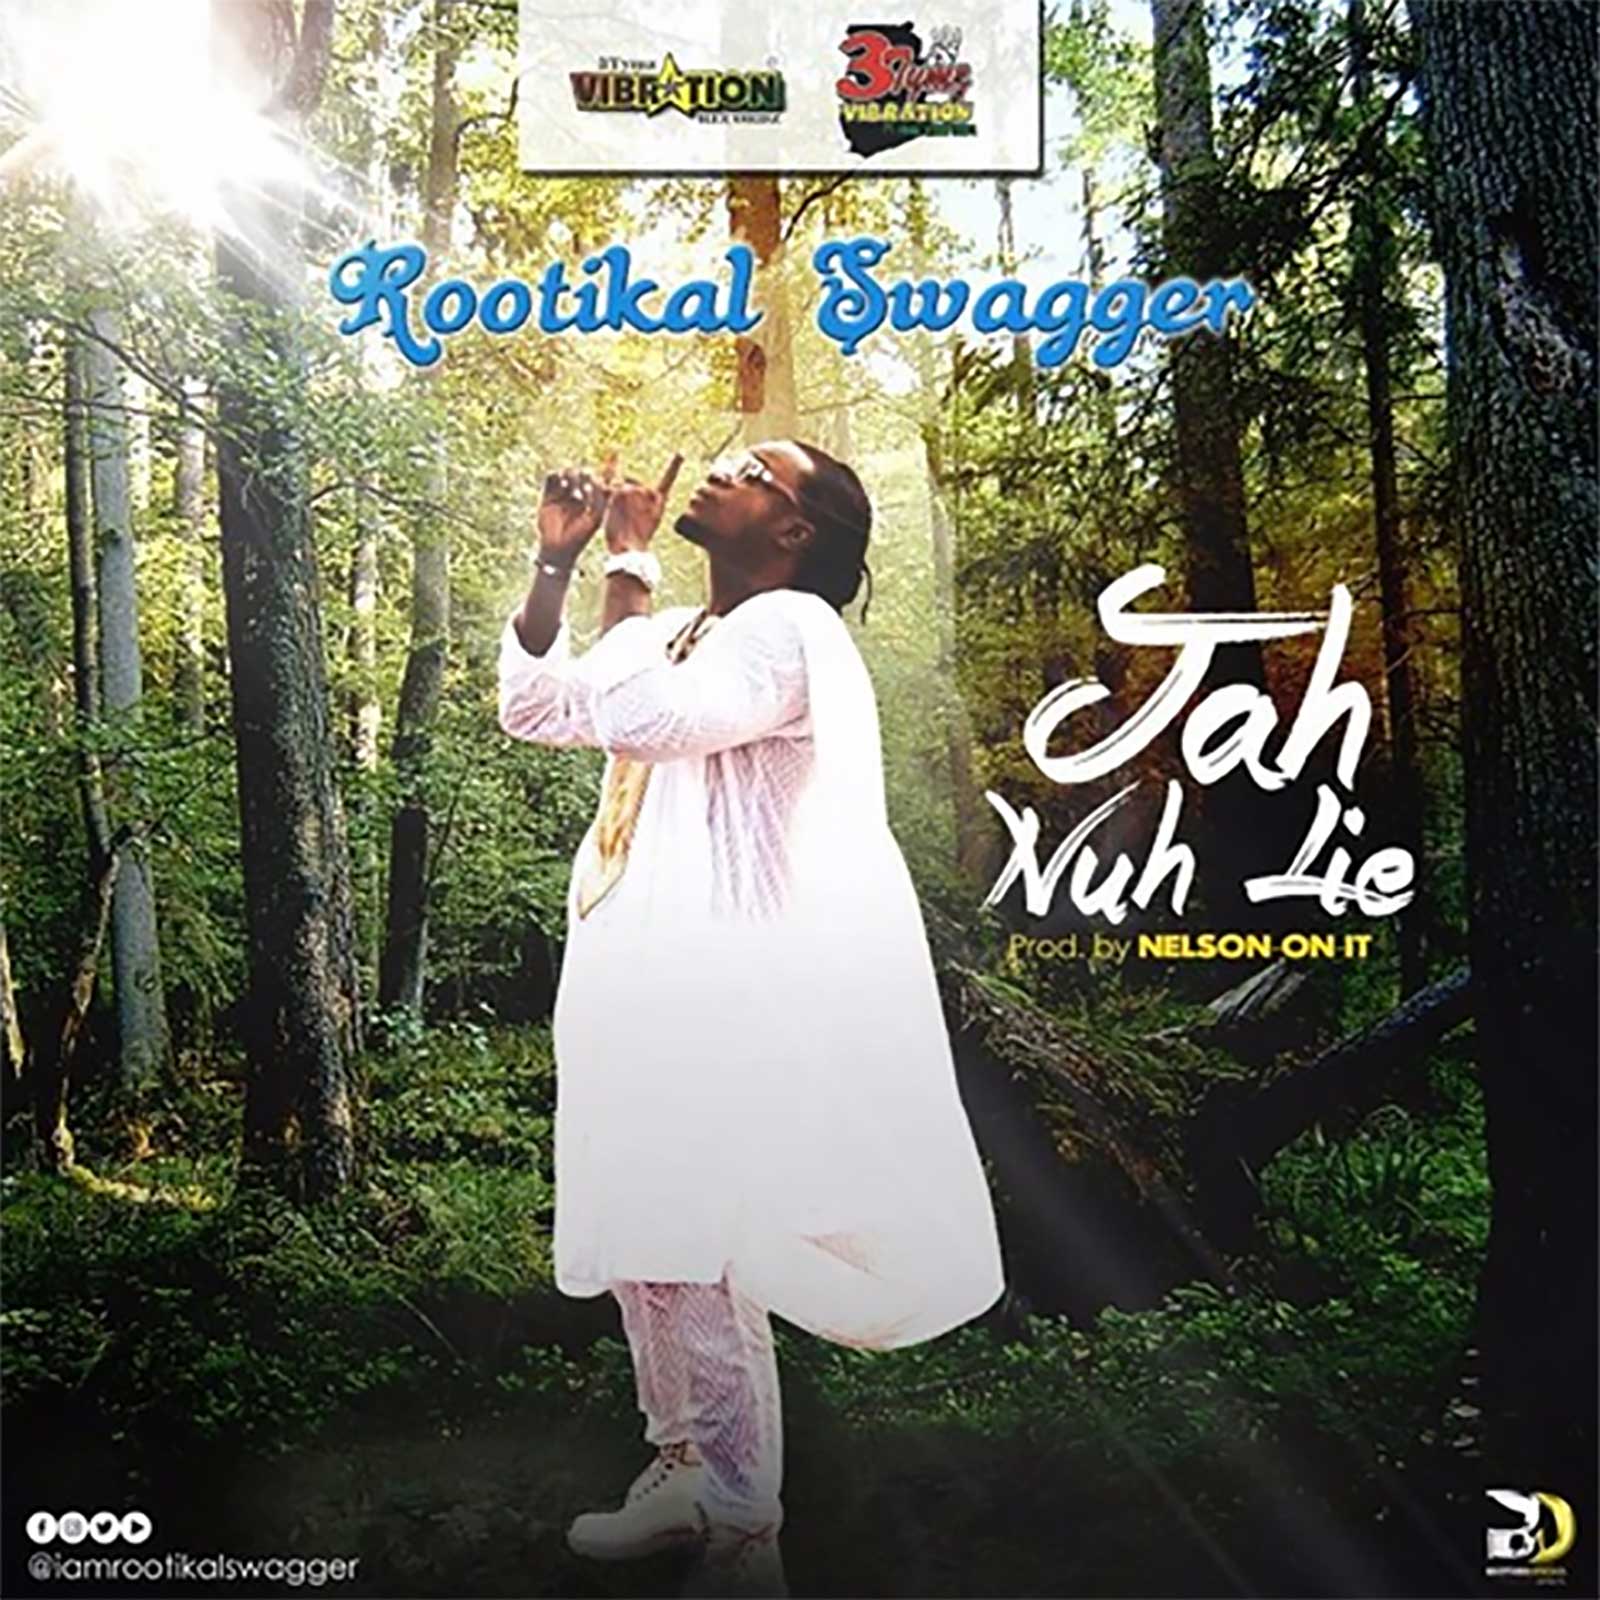 Jah Nuh Lie by Rootikal Swagger